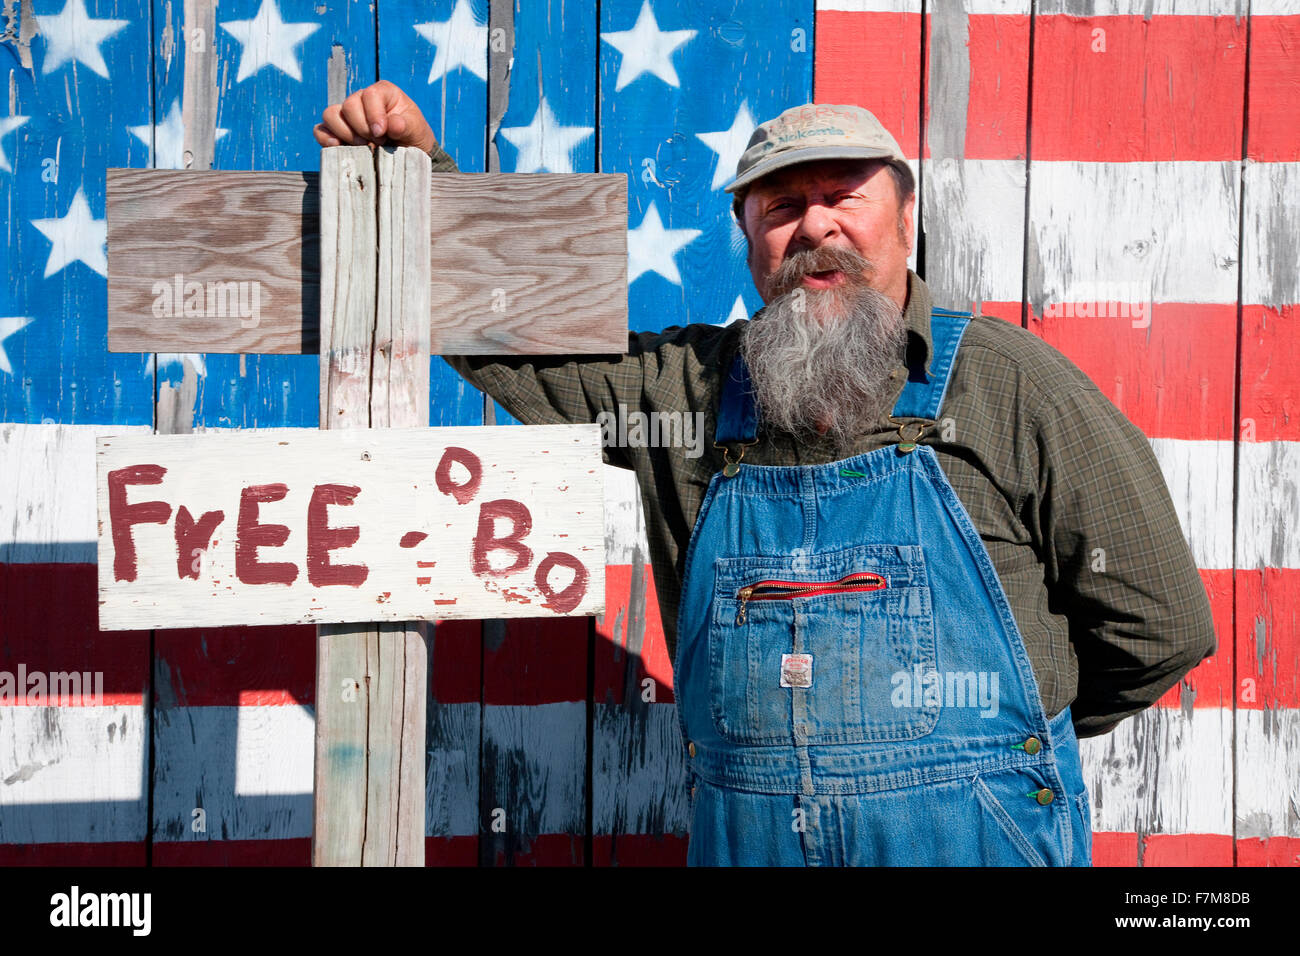 Howard the teacher poses in front of US flag and sign that says 'Free or Best Offer', near Augusta, Maine Stock Photo